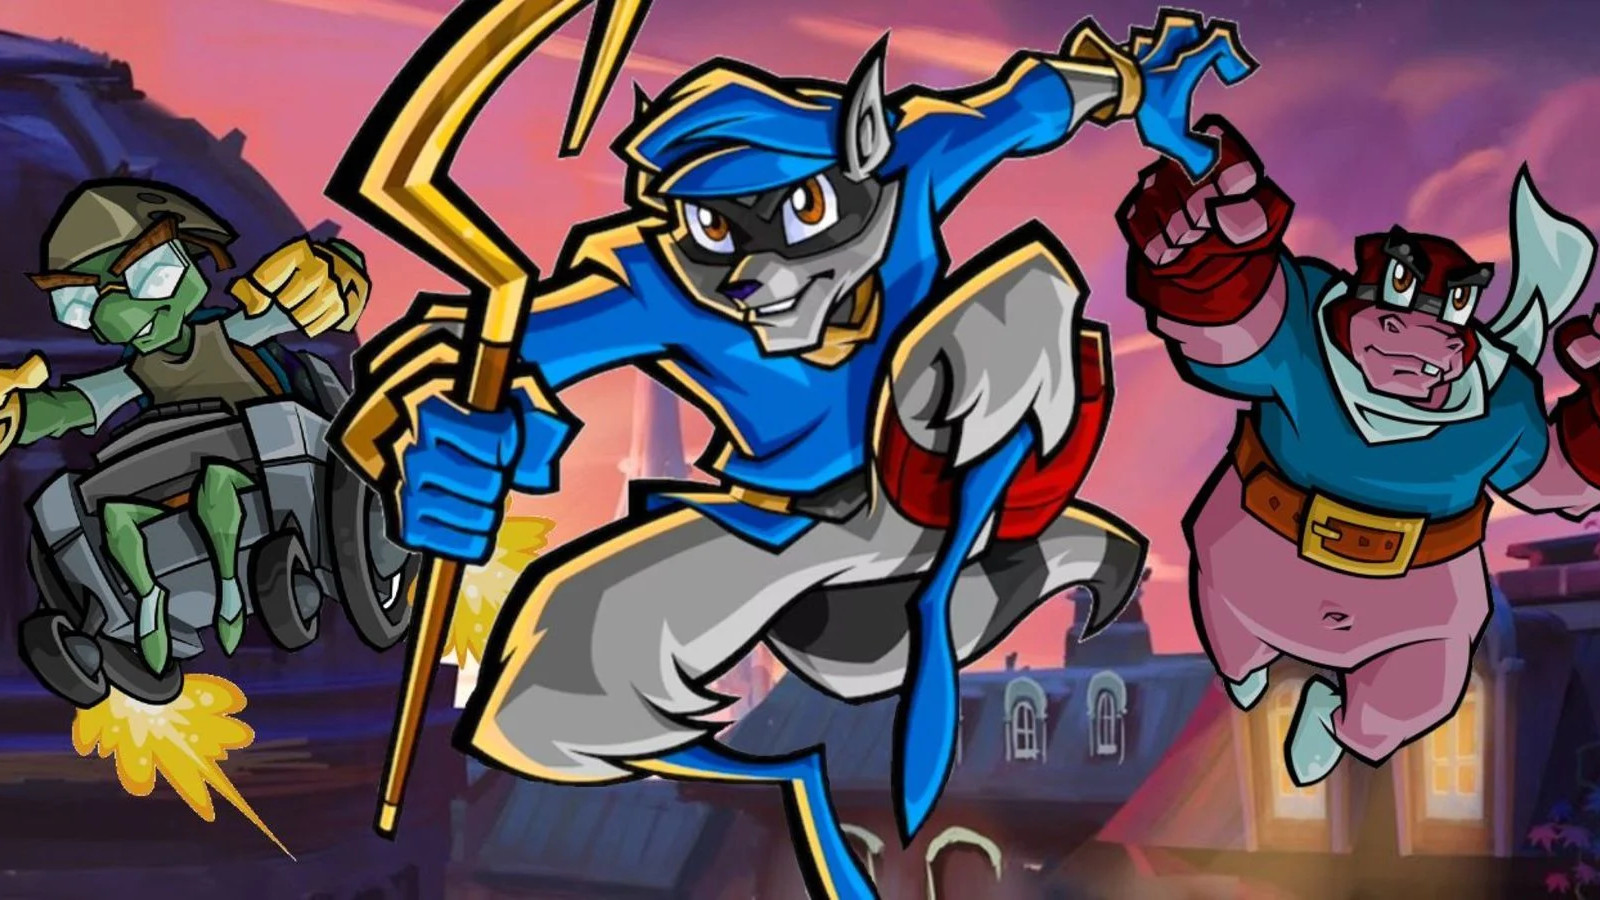 Sly Cooper 3 PS3, PlayStation.Blog